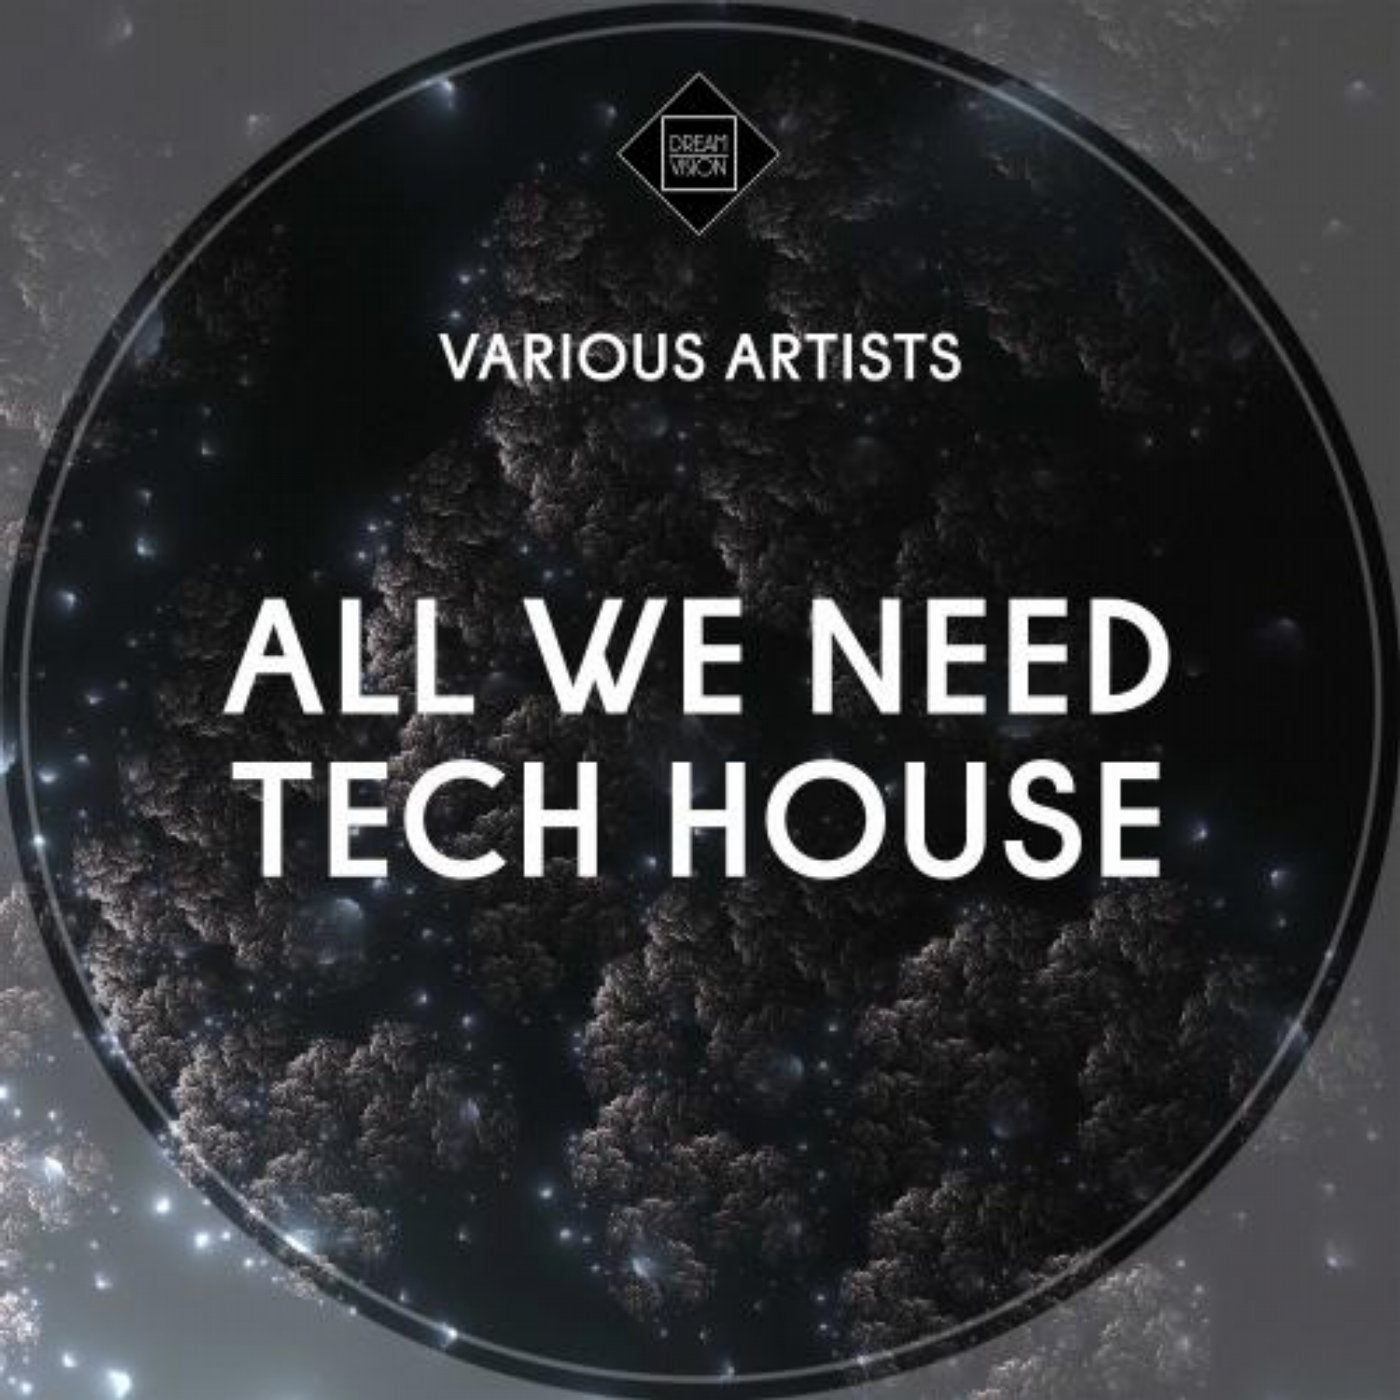 All We Need Tech House